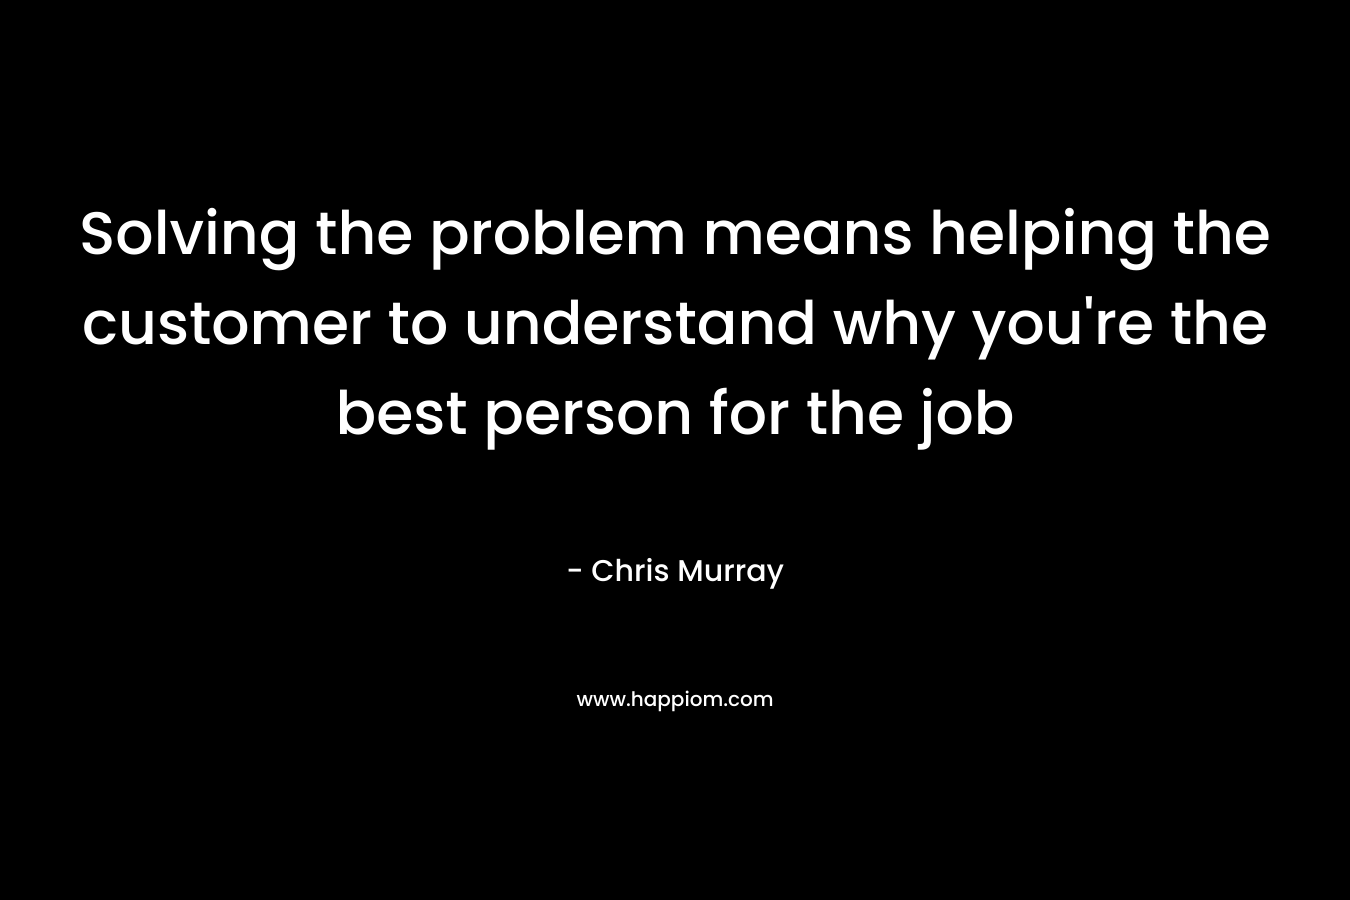 Solving the problem means helping the customer to understand why you're the best person for the job